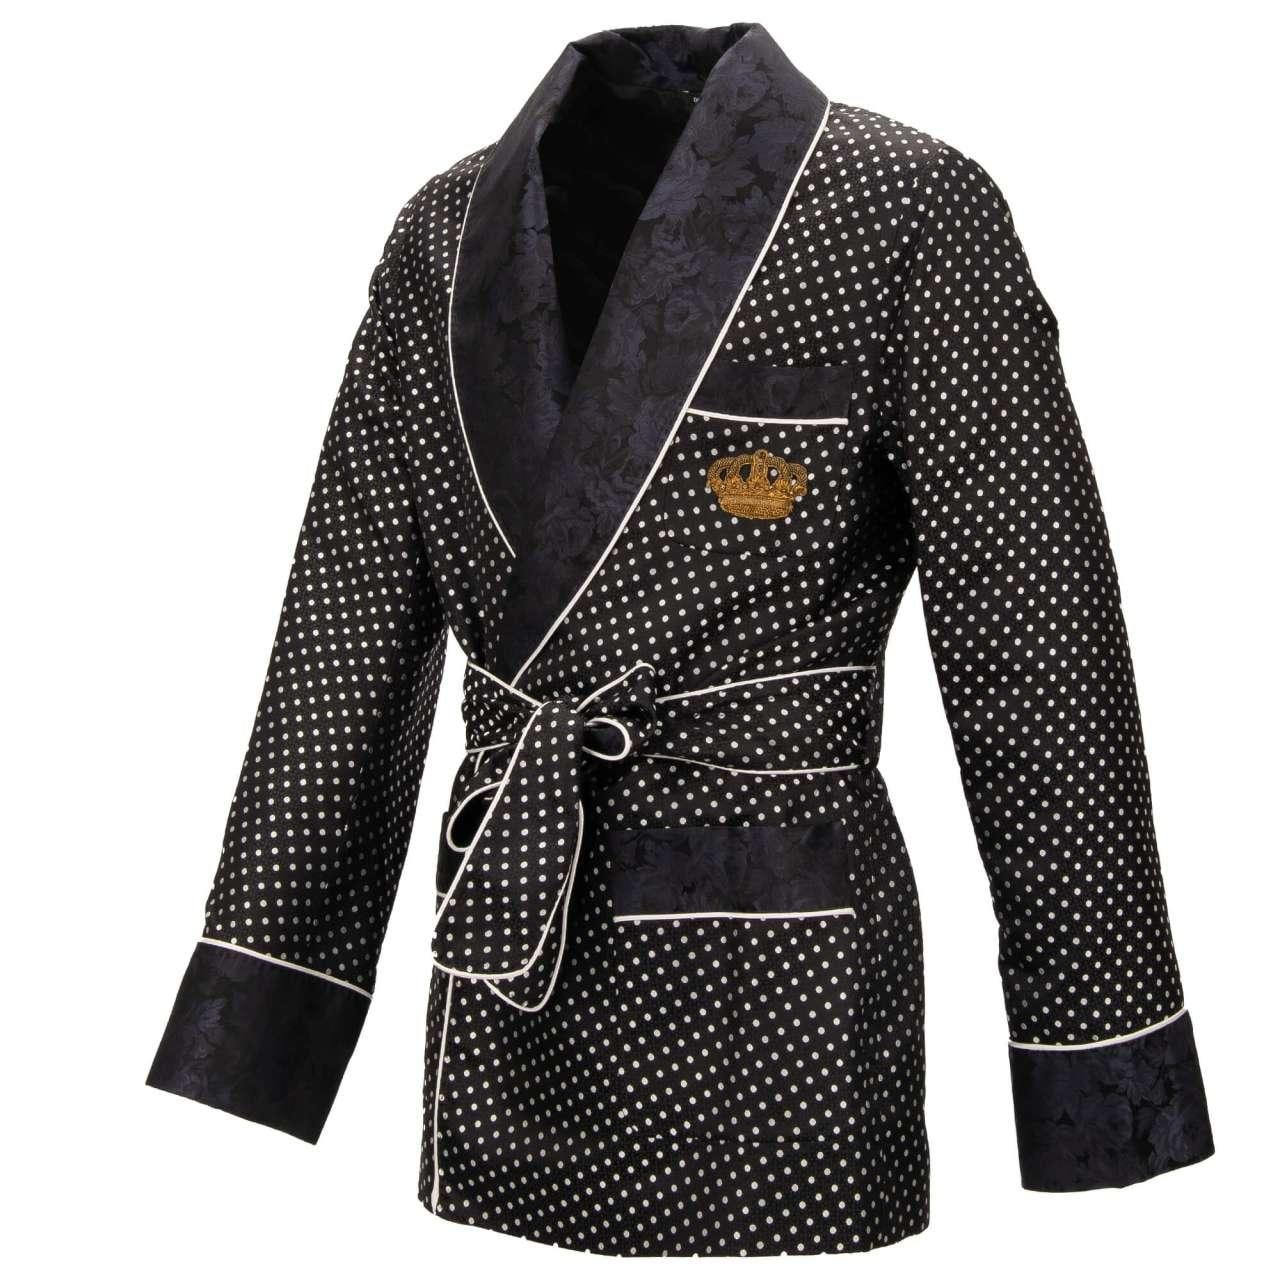 - Floral and polka dot pattern silk jacquard Robe / Blazer with goldwork crown embroidery and belt fastening in black and white by DOLCE & GABBANA - Former RRP: EUR 2,585 - MADE IN ITALY - New with Tag - Regular Fit - Model: G001JZ-FJ1EY-S8350 -